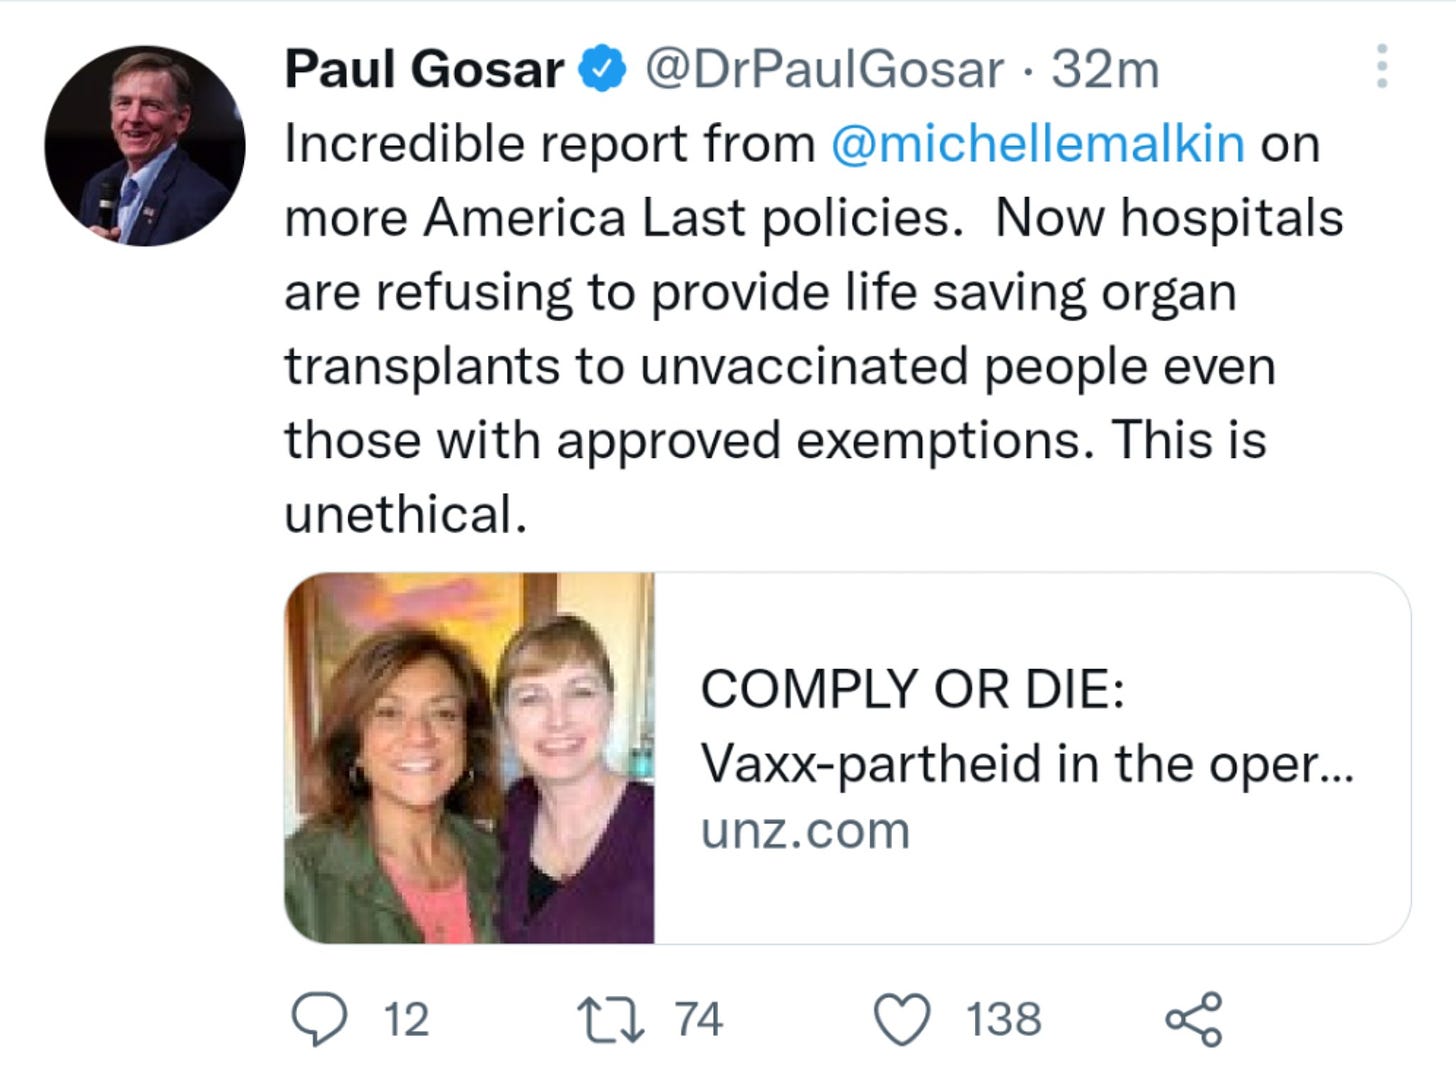 Screenshot of Paul Gosar tweet that reads: "Incredible report from @michellemalkin  on more America Last policies.  Now hospitals are refusing to provide life saving organ transplants to unvaccinated people even those with approved exemptions. This is unethical."